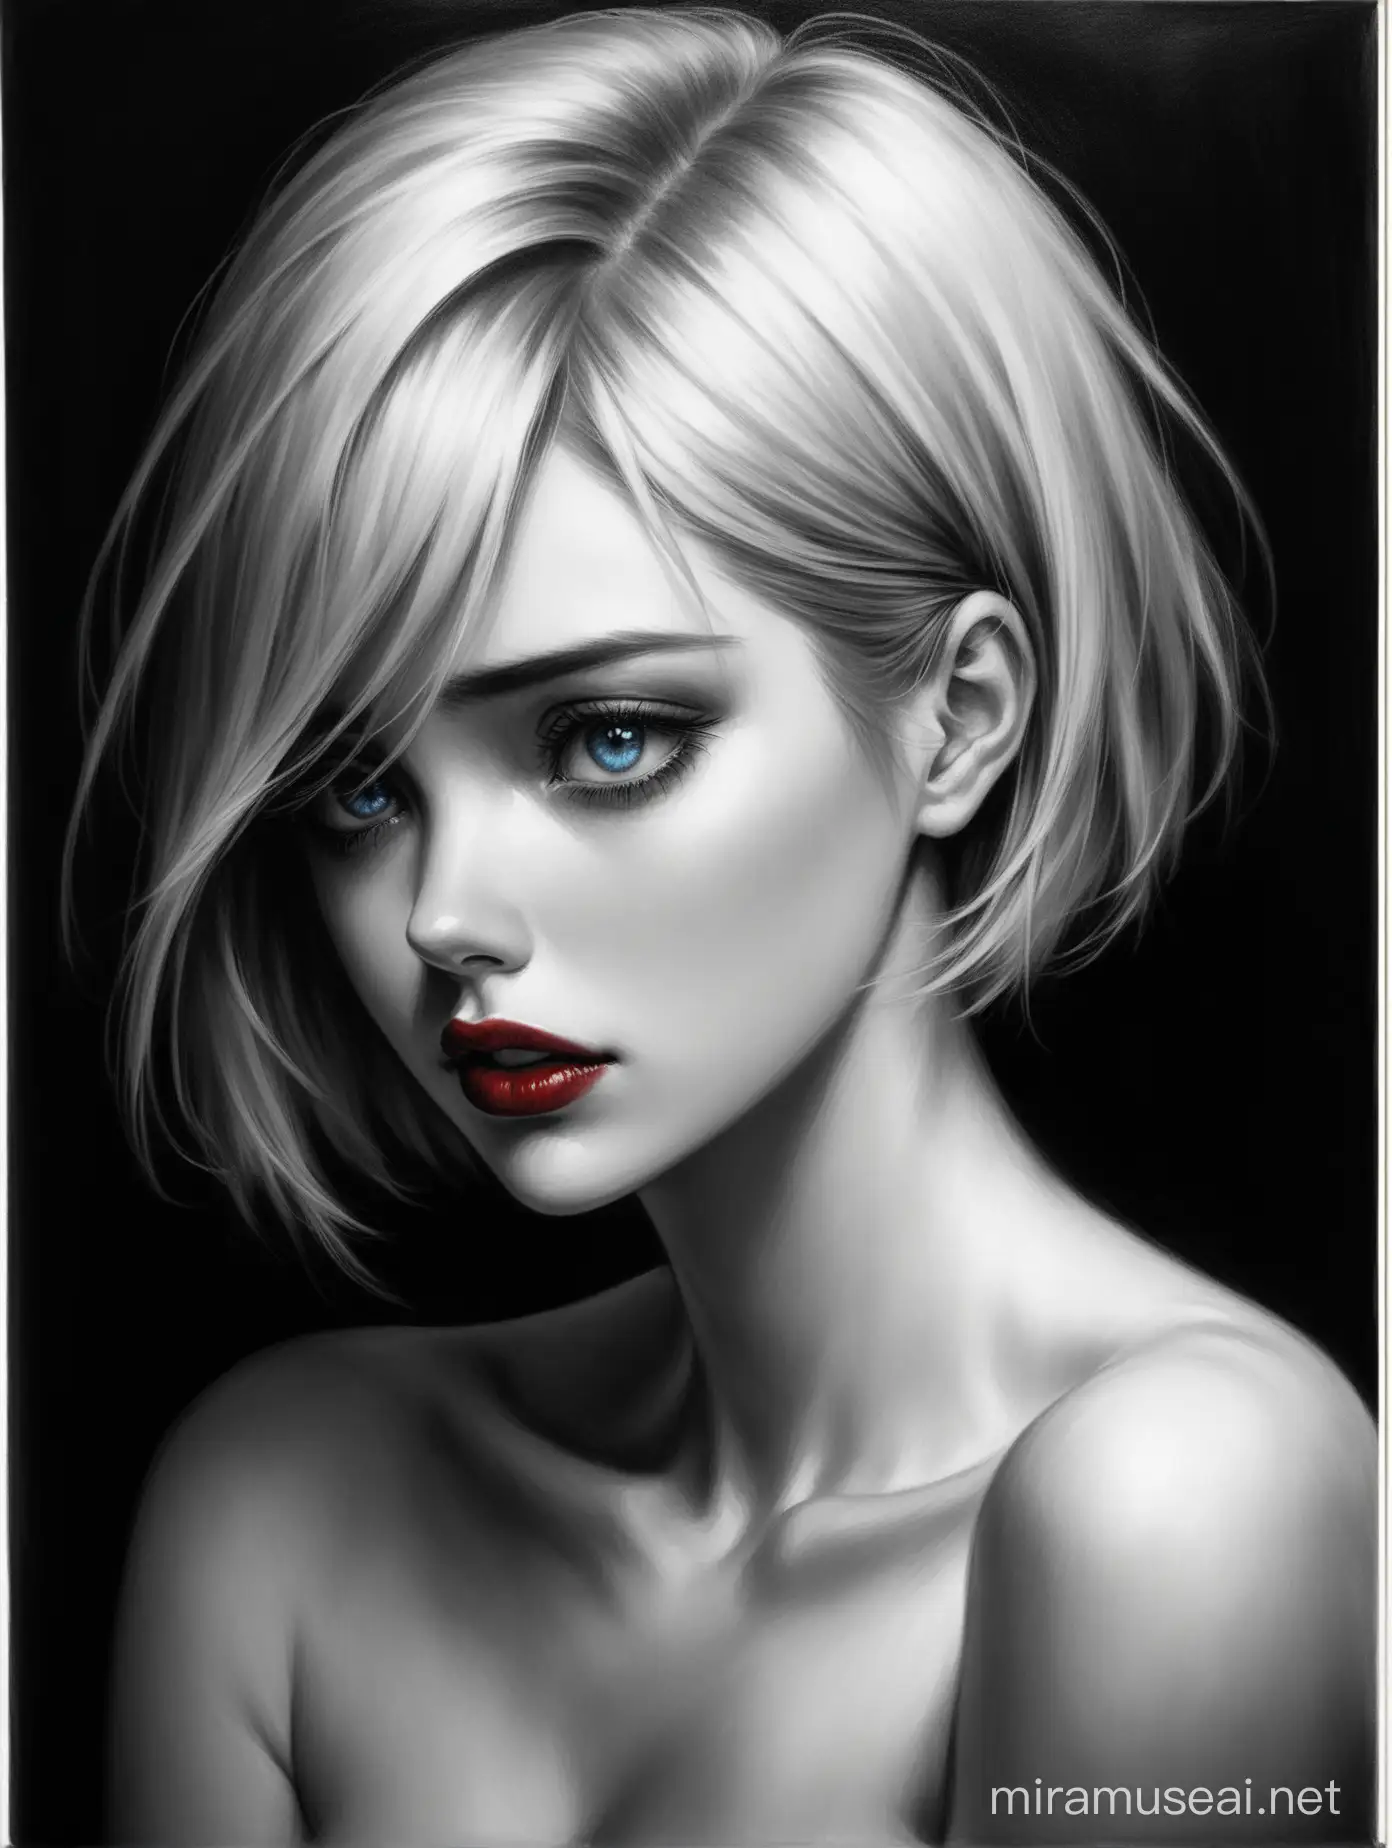  Alviision , Inside the most beautiful people are often hidden deep depression and eyes full of sadness . Charcoal painting of a woman with short hair falling over her shoulders , full red lips , . Realistic , ultra - detailed , blue eyes . Sorrow , sadness in her look, black and white, lighting